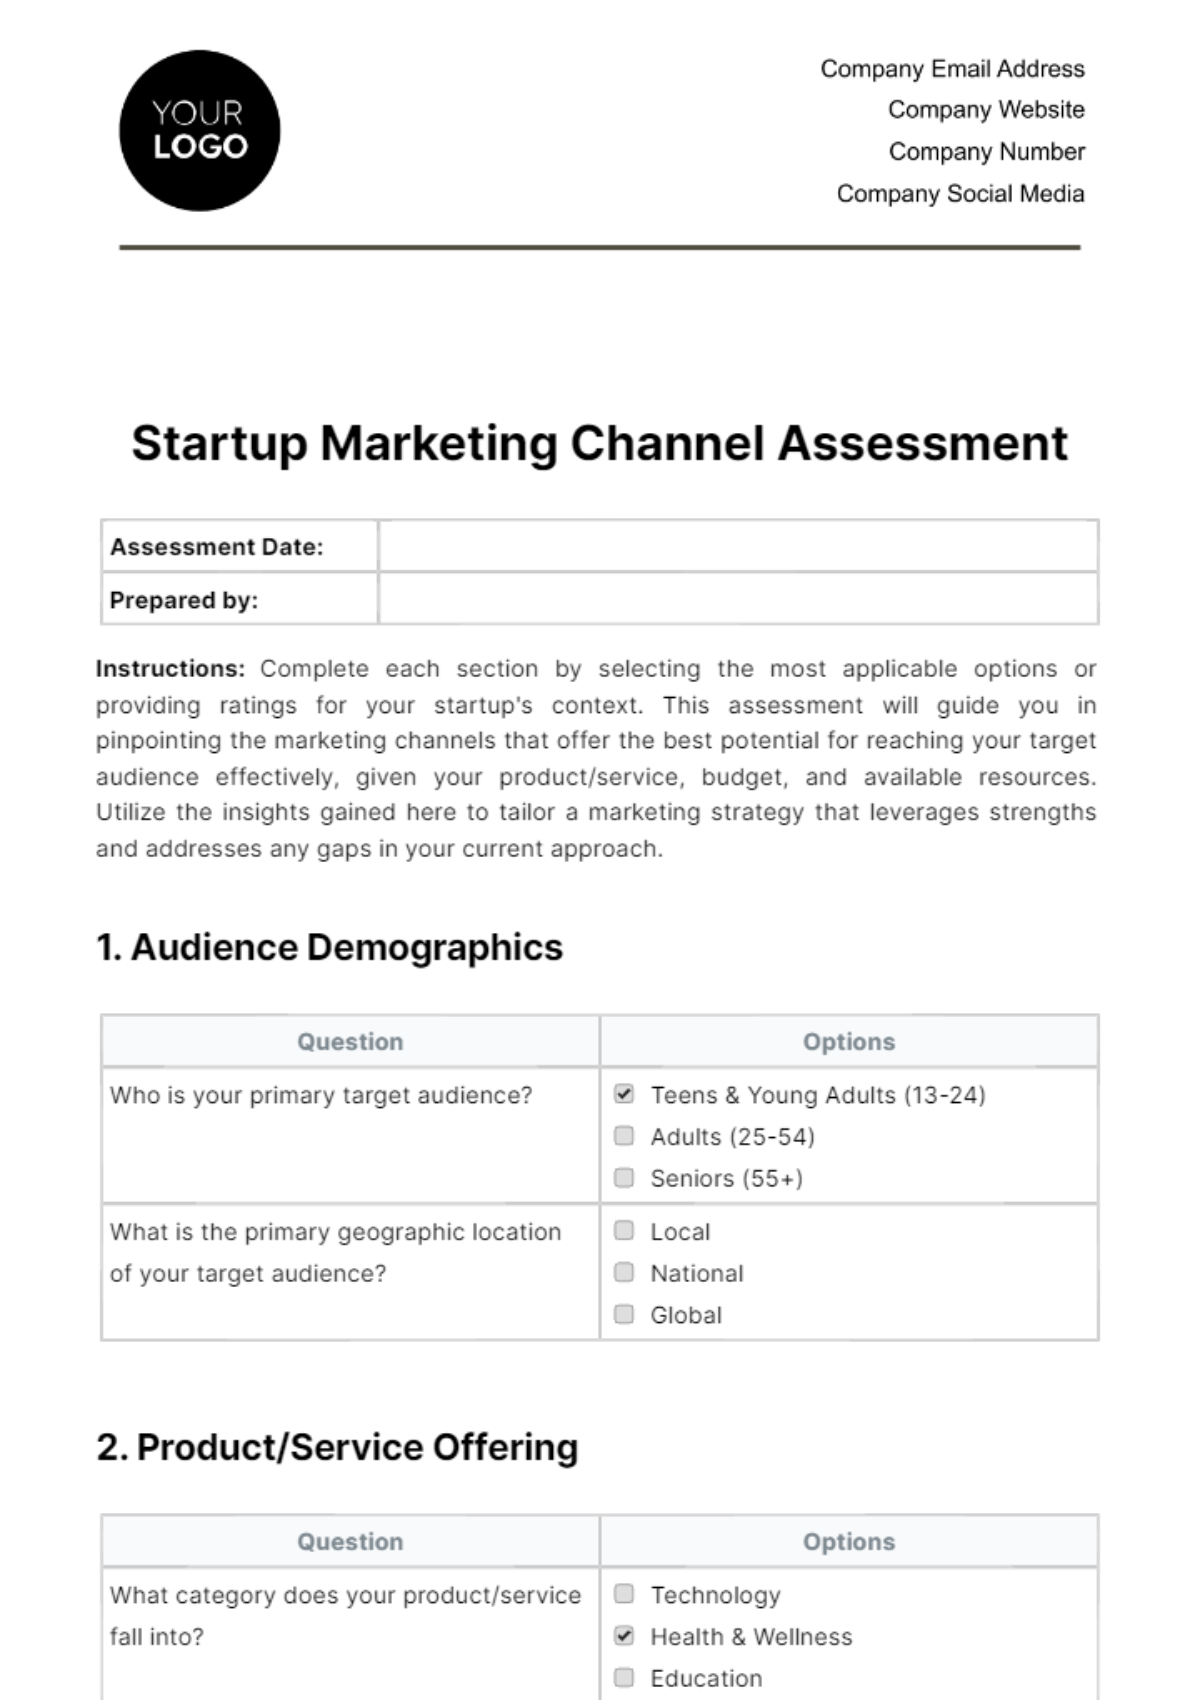 Startup Marketing Channel Assessment Template